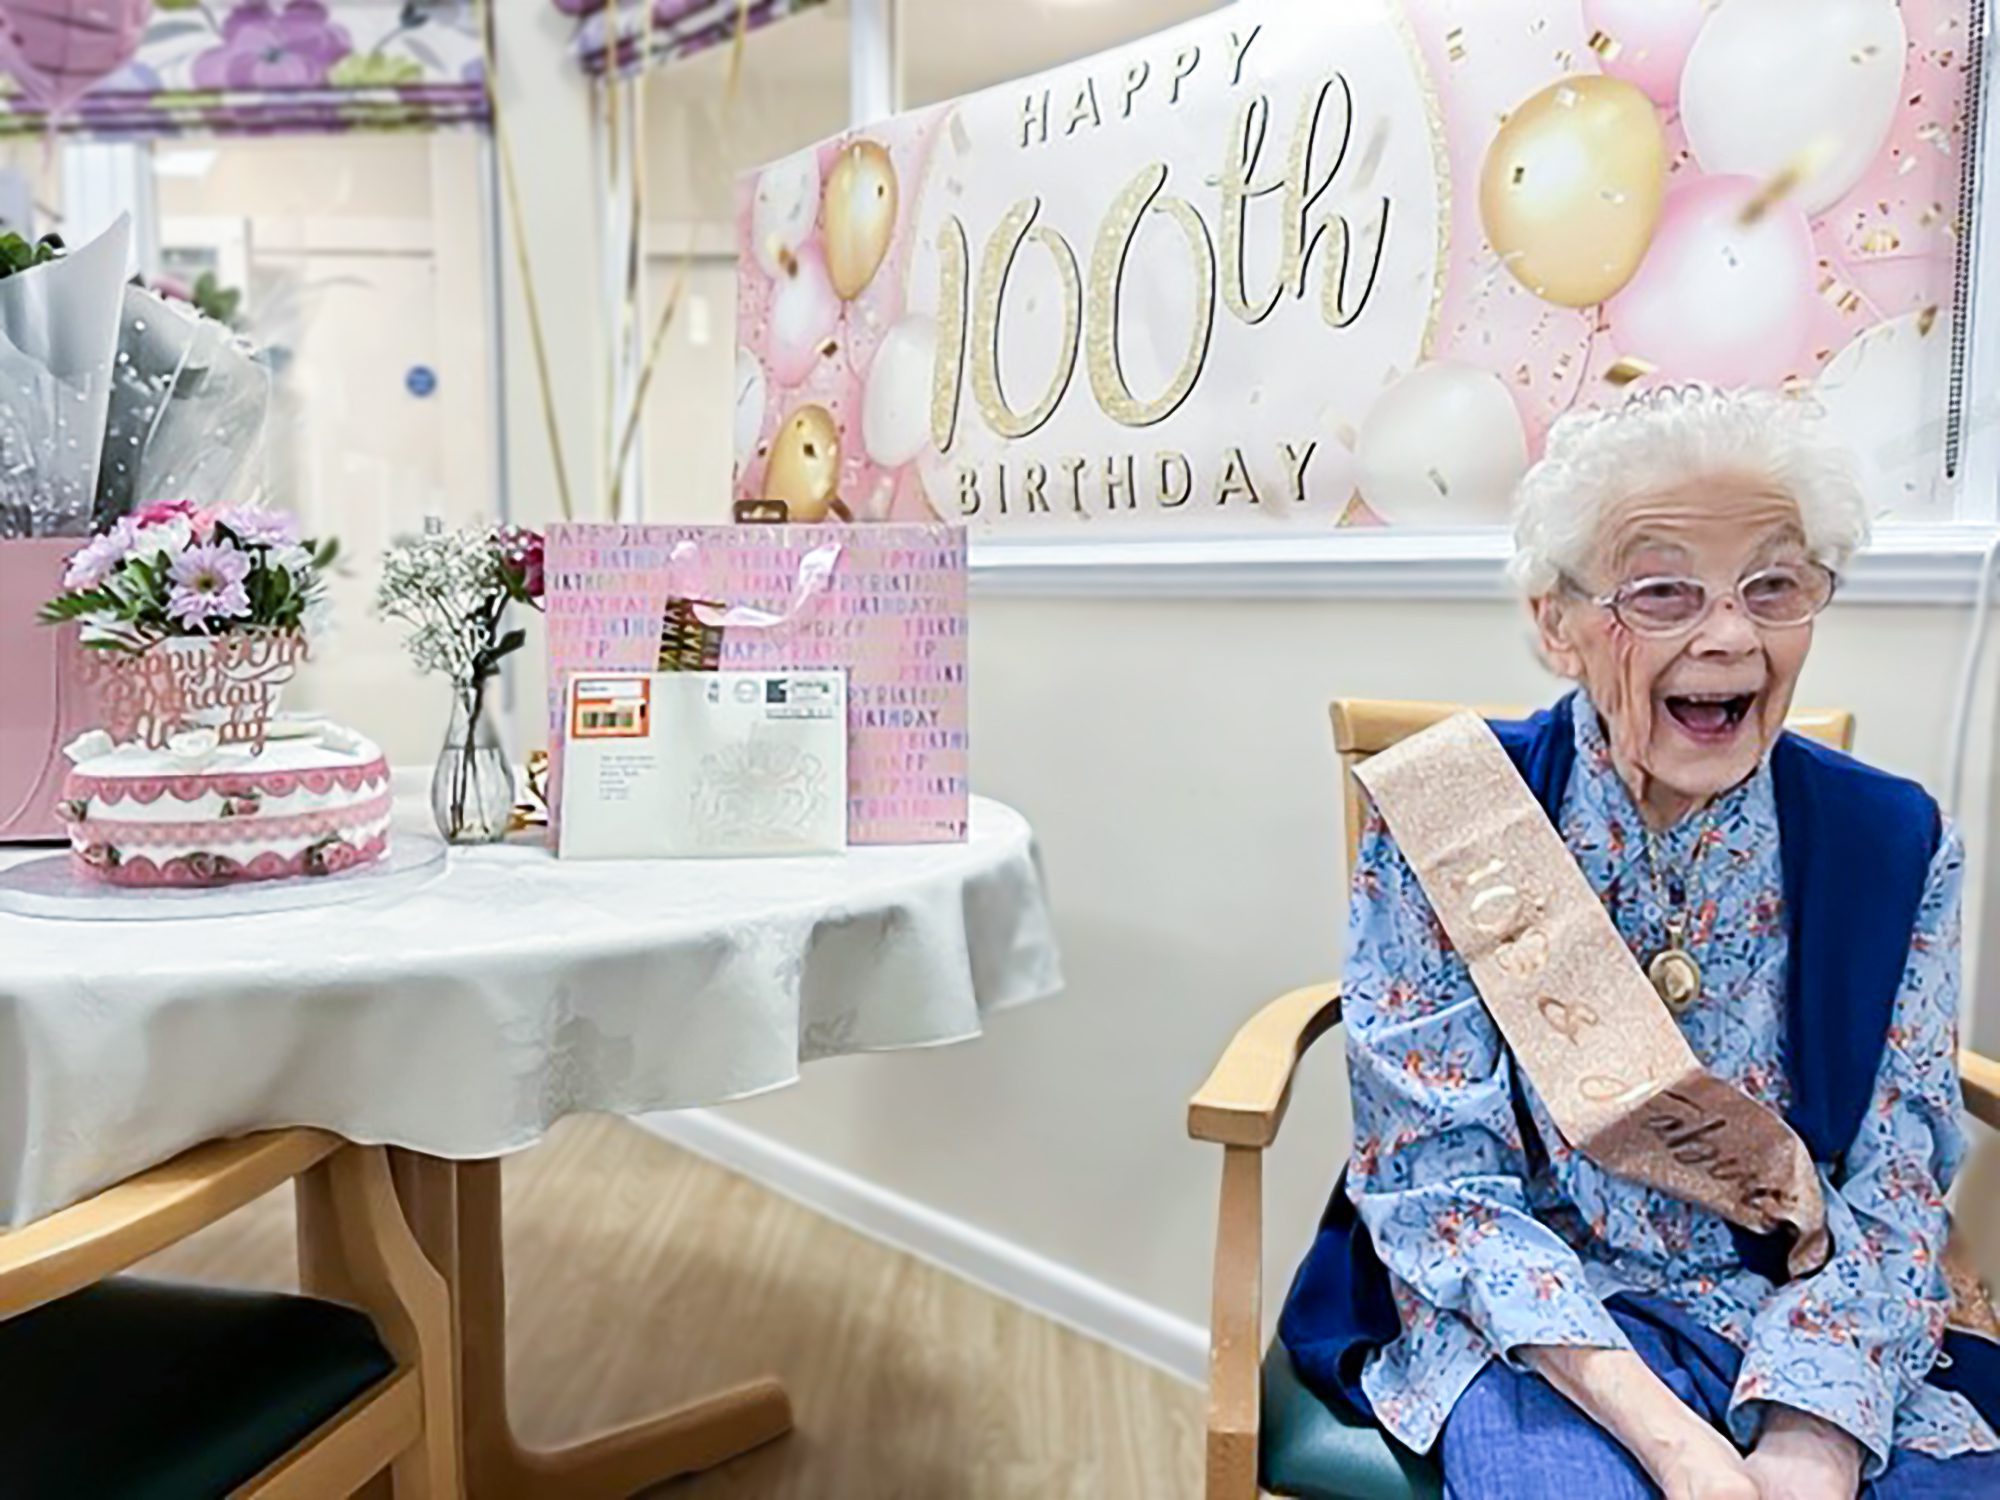 Wendy smiling on her 100th Birthday. 